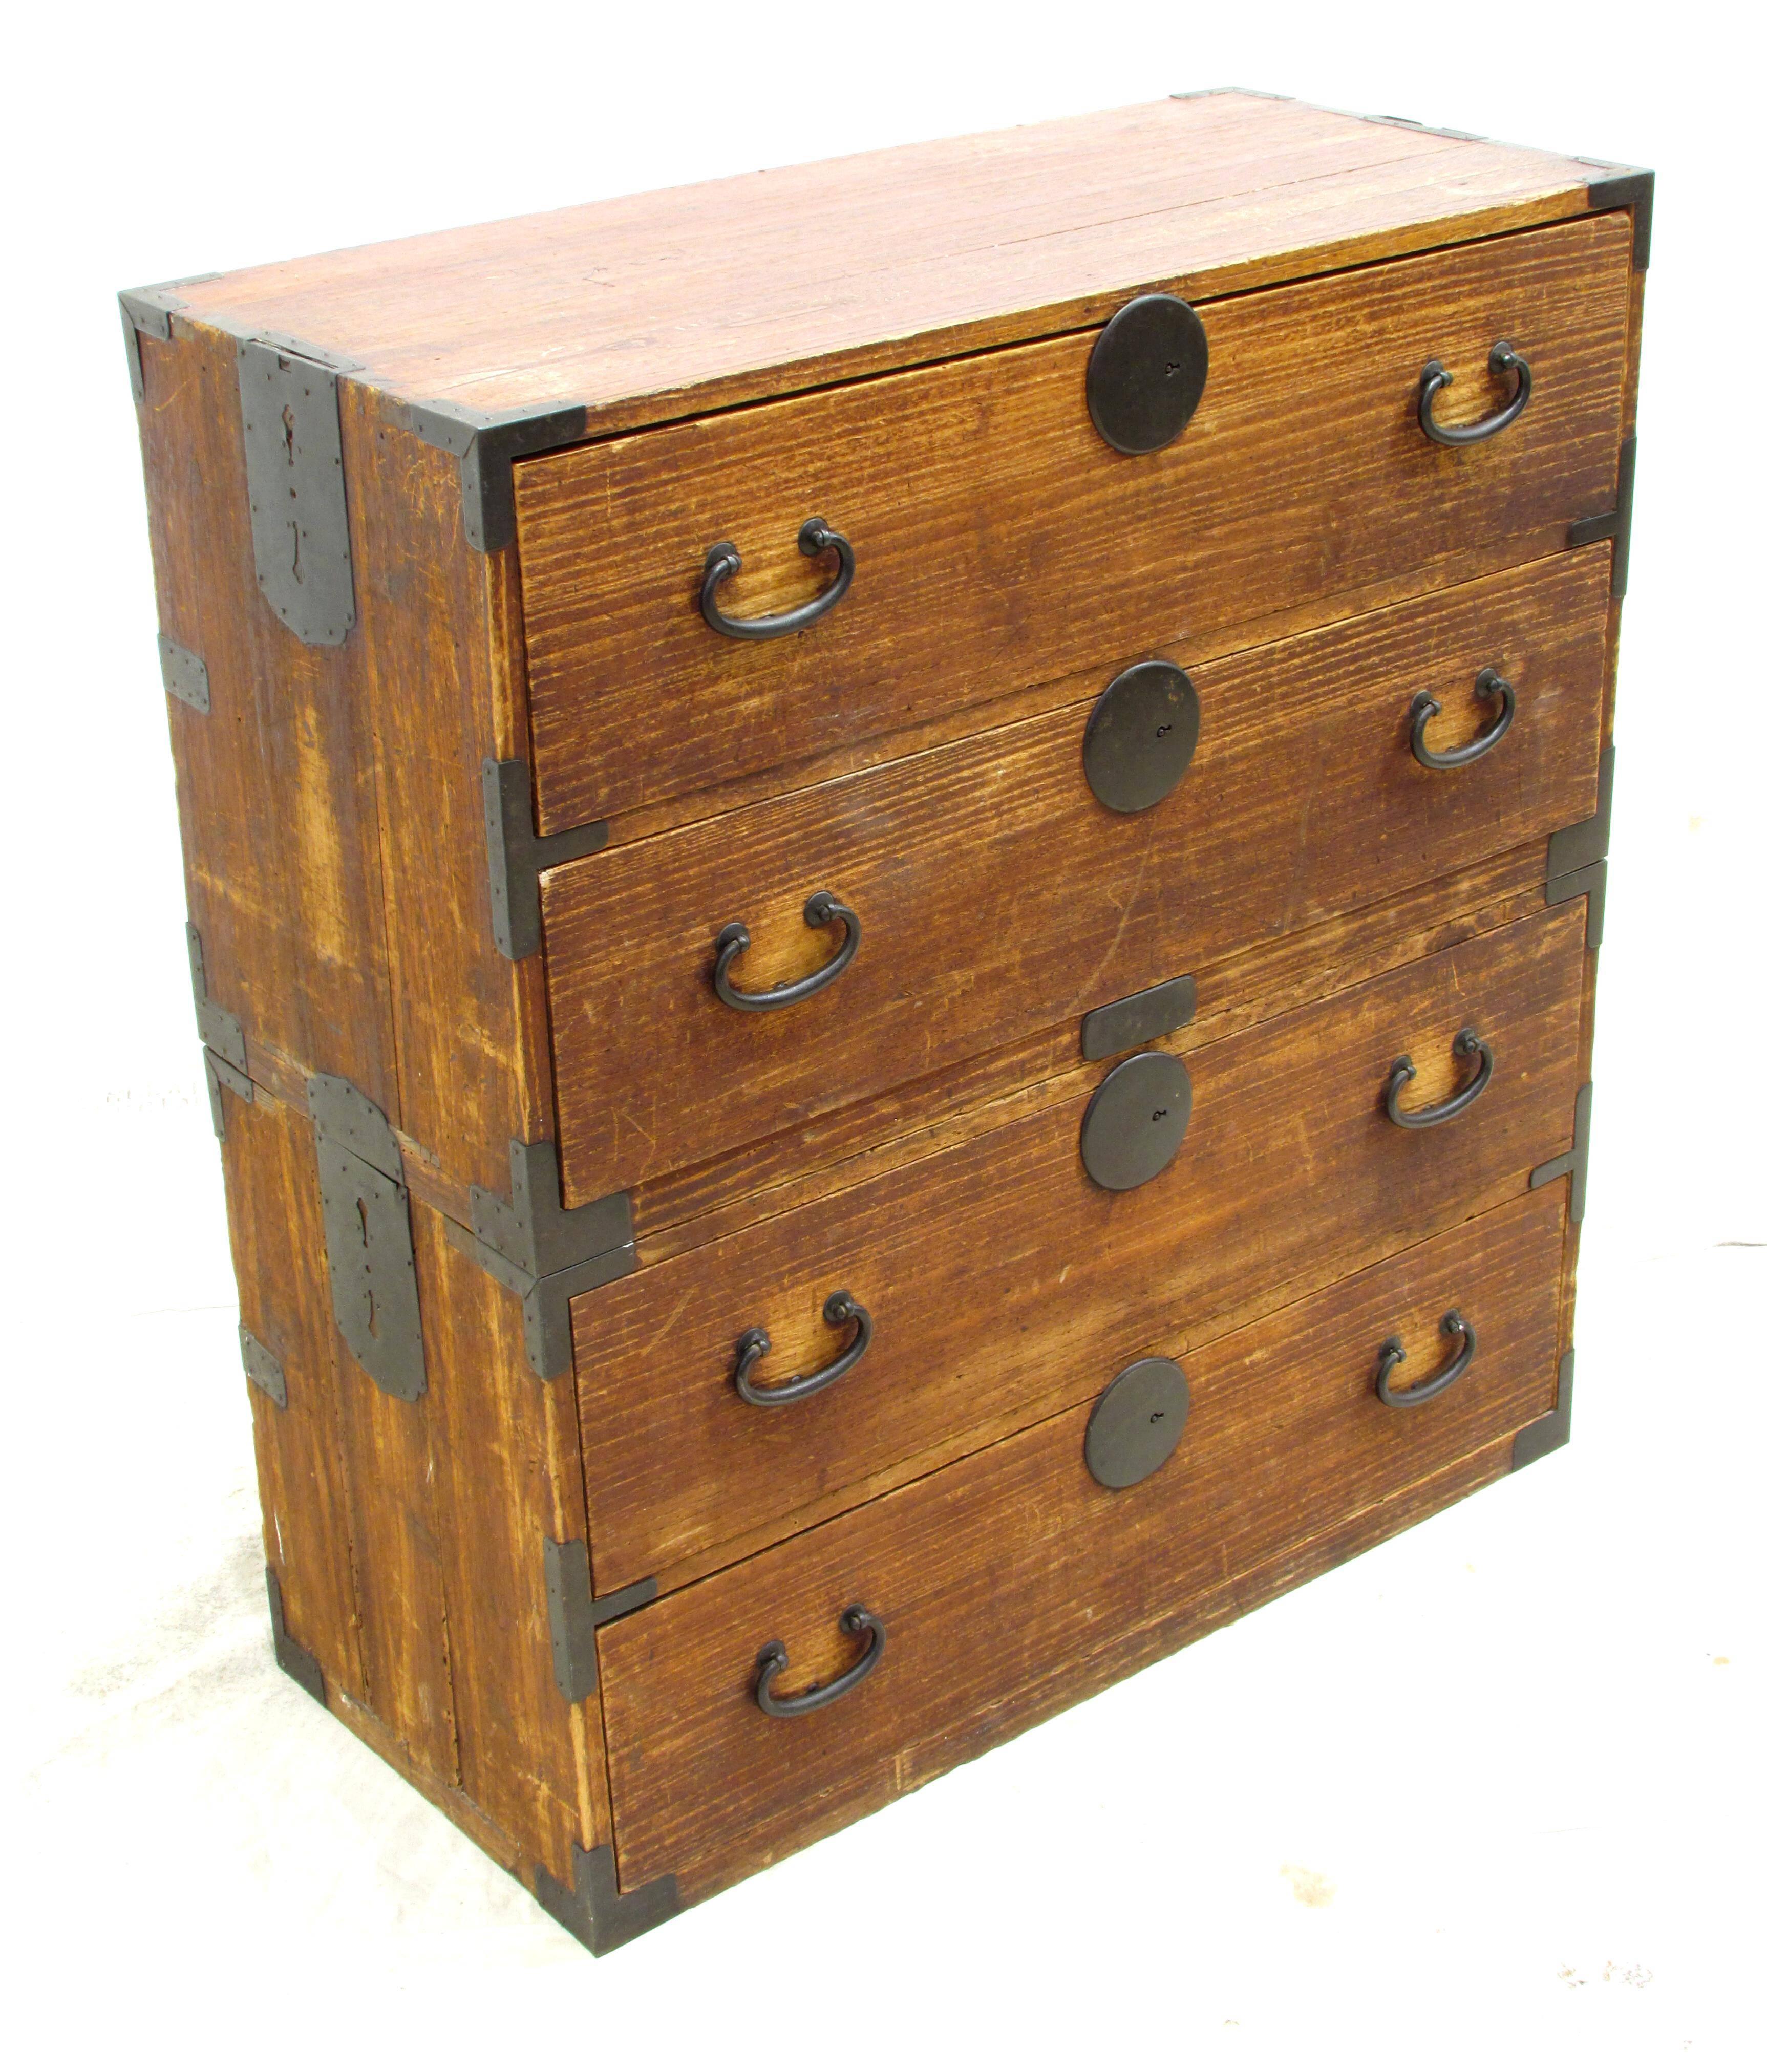 Rustic worn wood Japanese chest on chest with iron handles and lock covers
Meiji period.